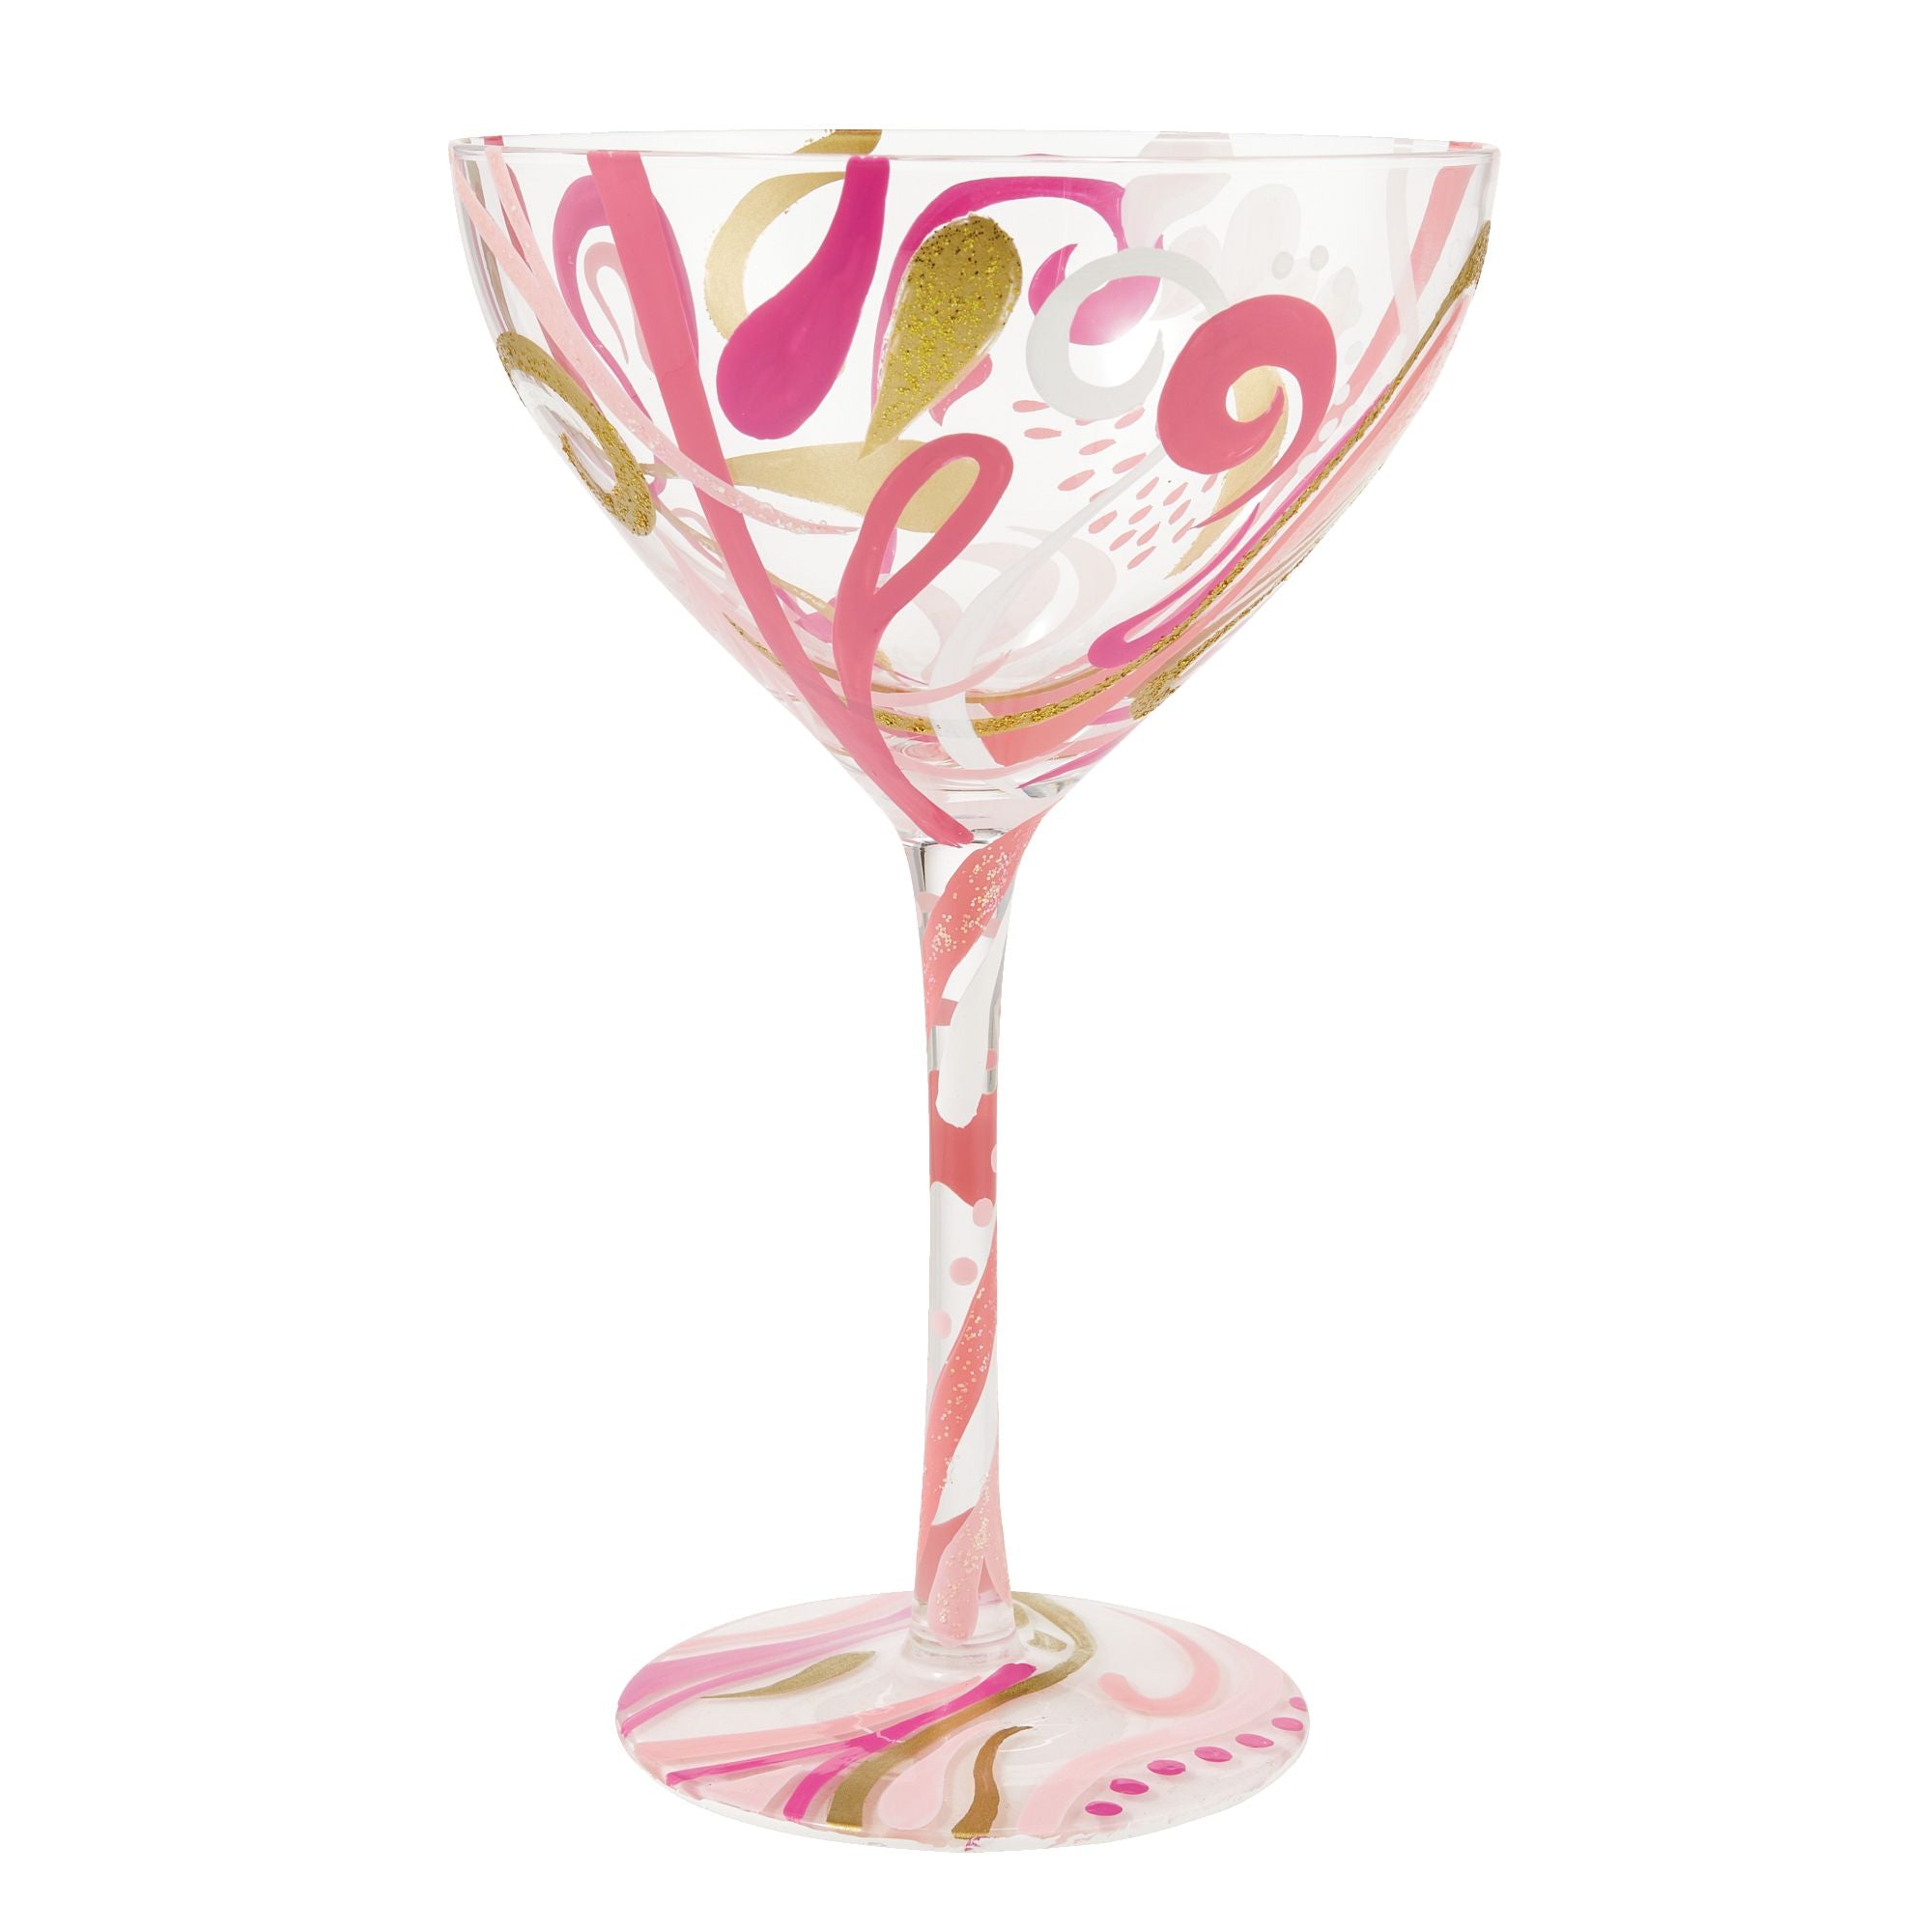 Lolita Negroni Hand Painted Cocktail Glass Cocktail Glass